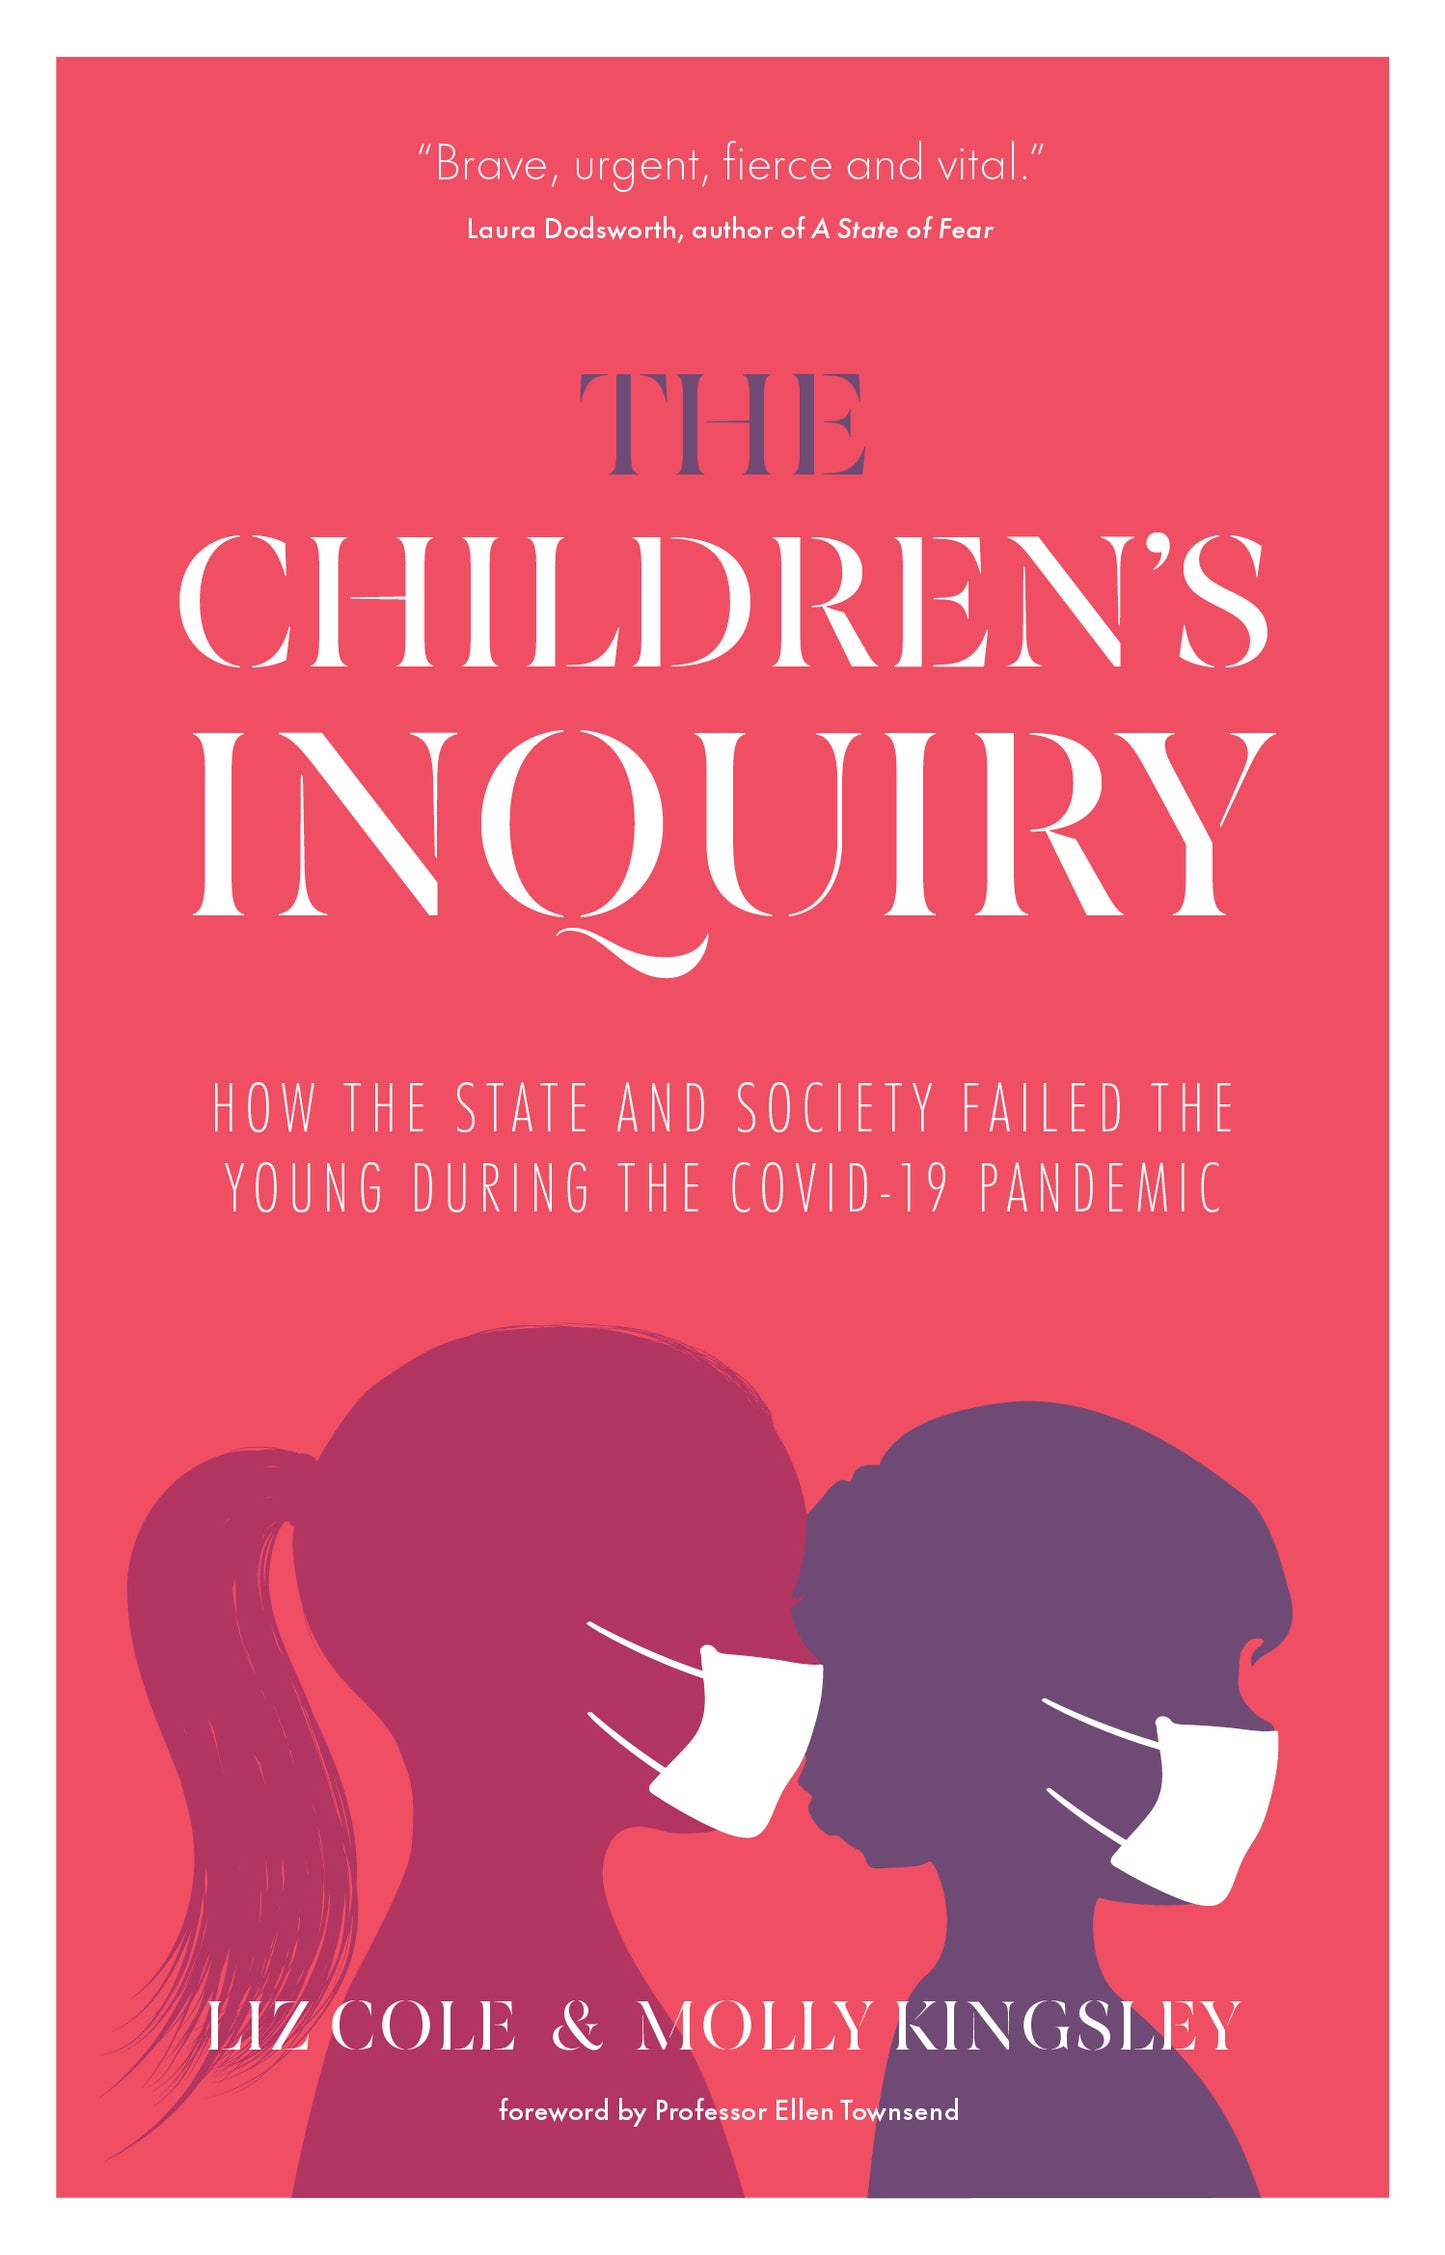 The Children's Inquiry: How the state and society failed the young during the Covid-19 pandemic